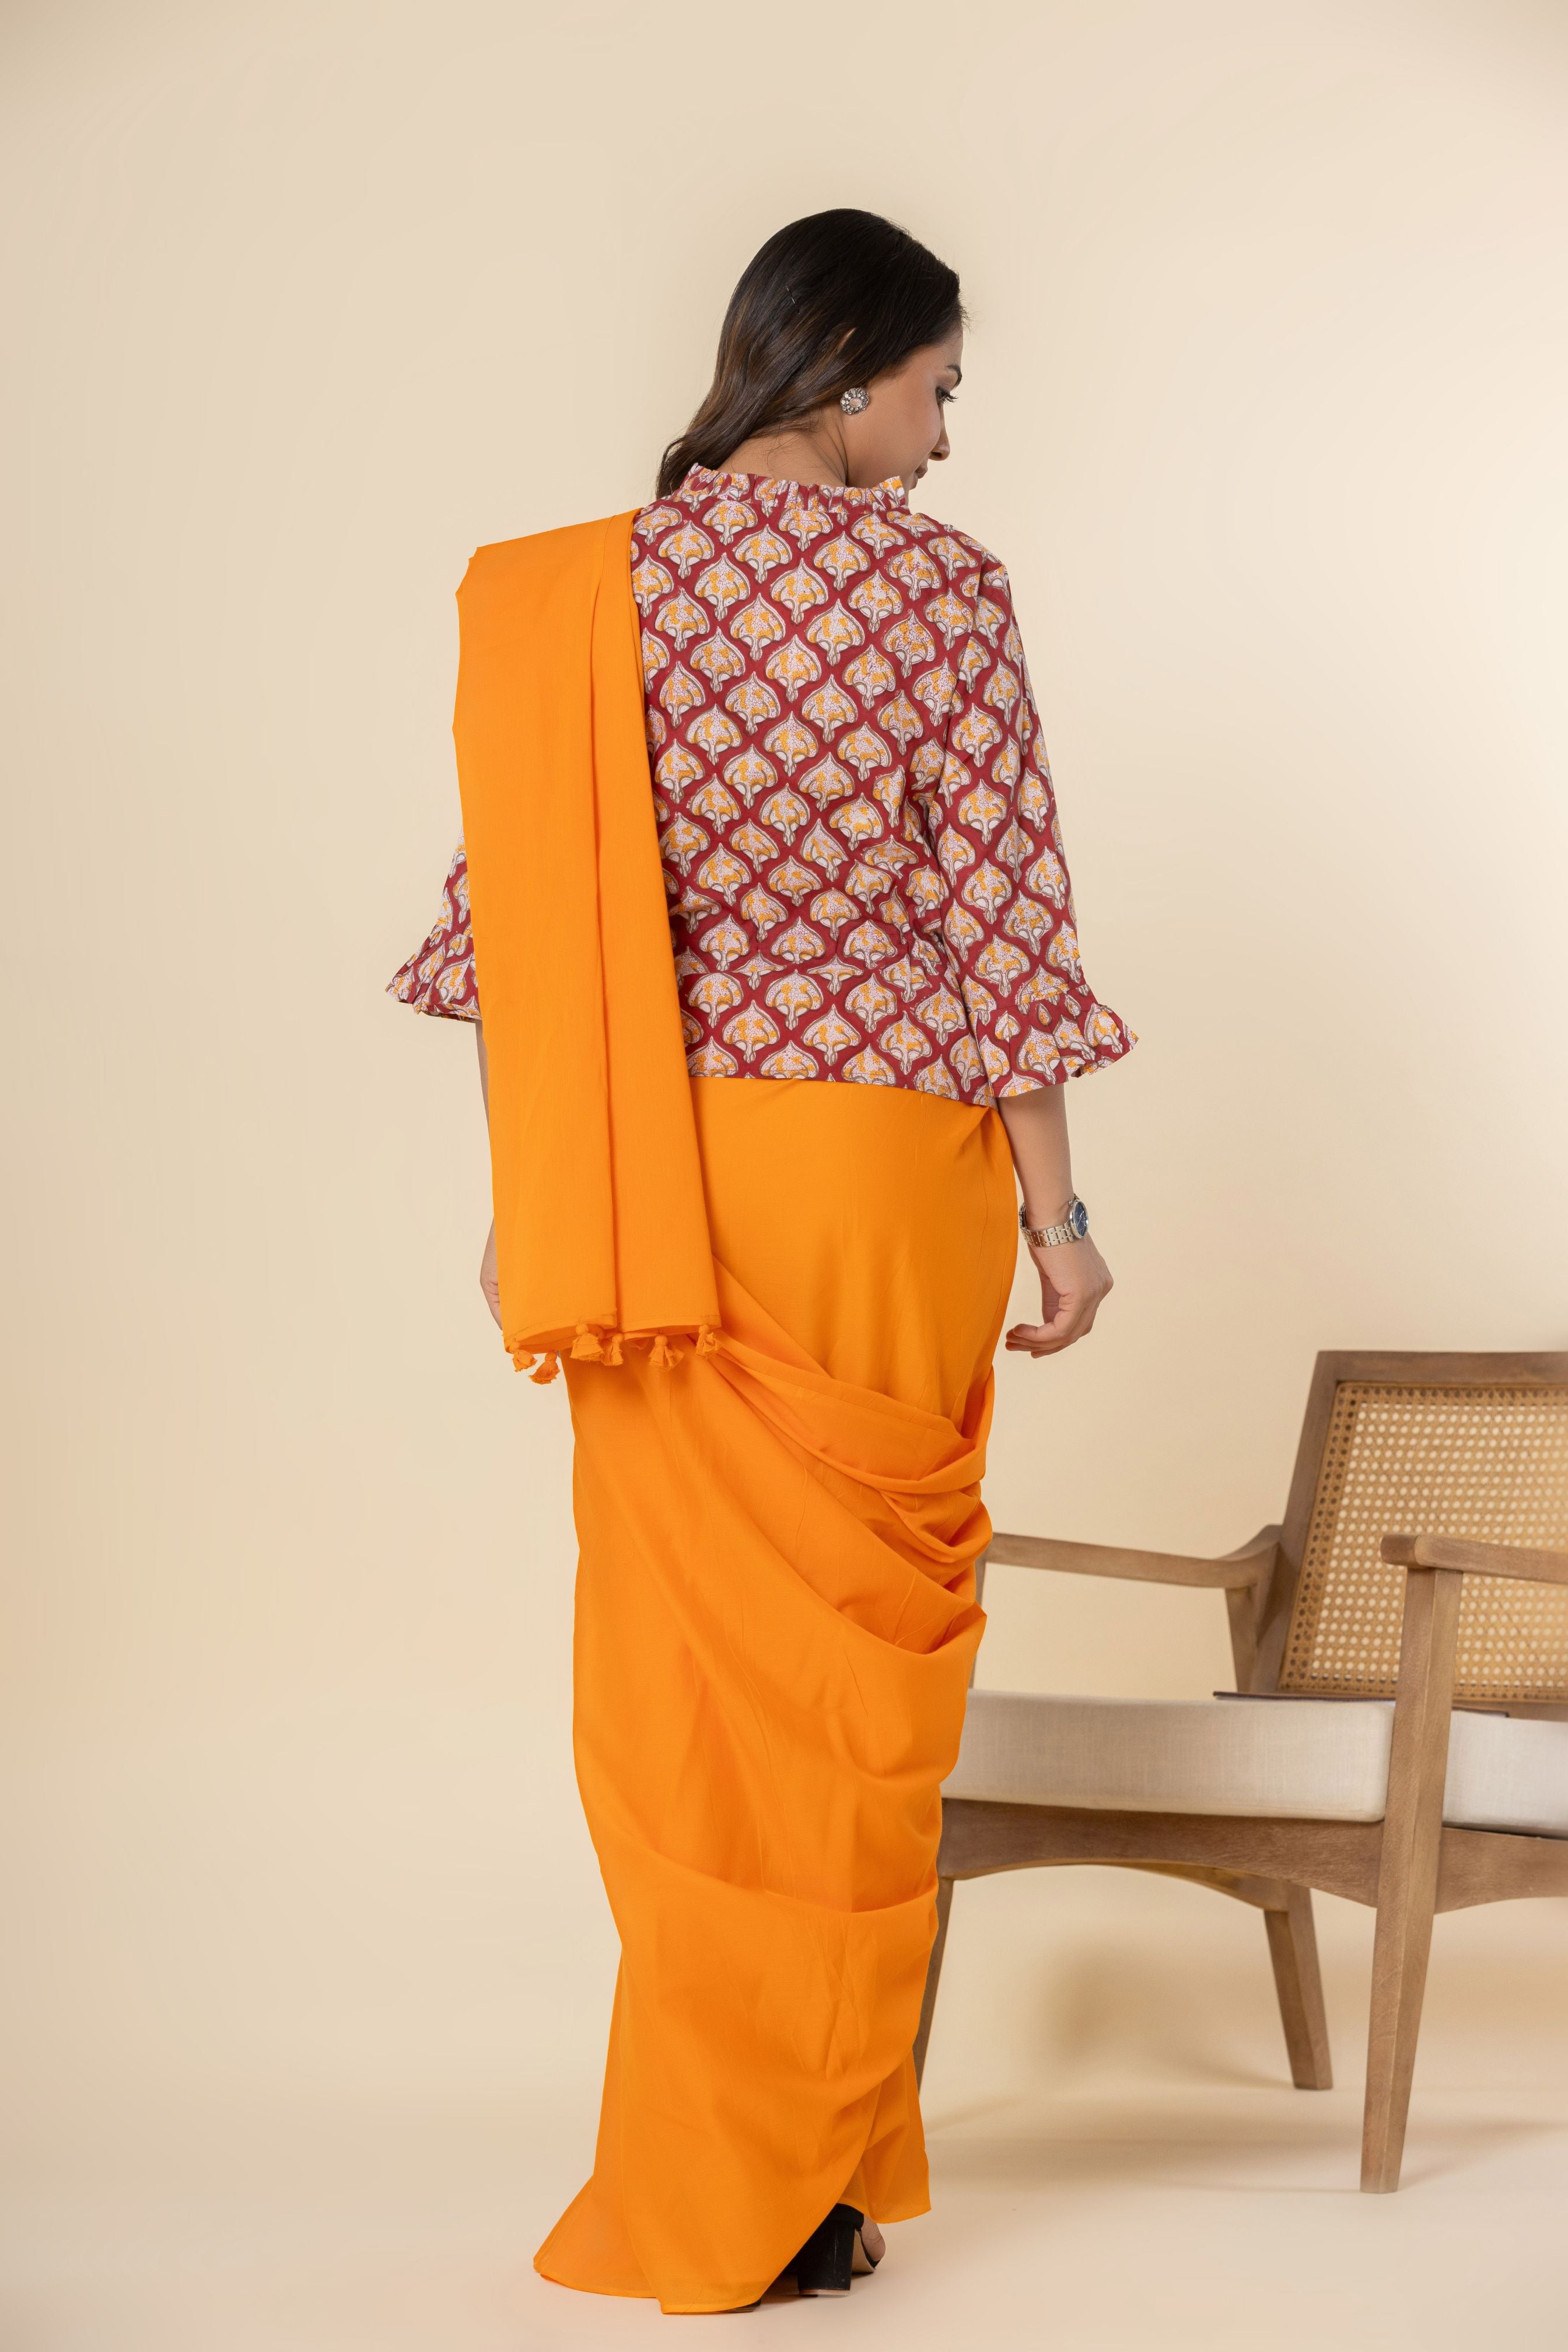 Sunrise Orange Dyed Mul Mul Cotton Saree with Tassels (without Blouse)